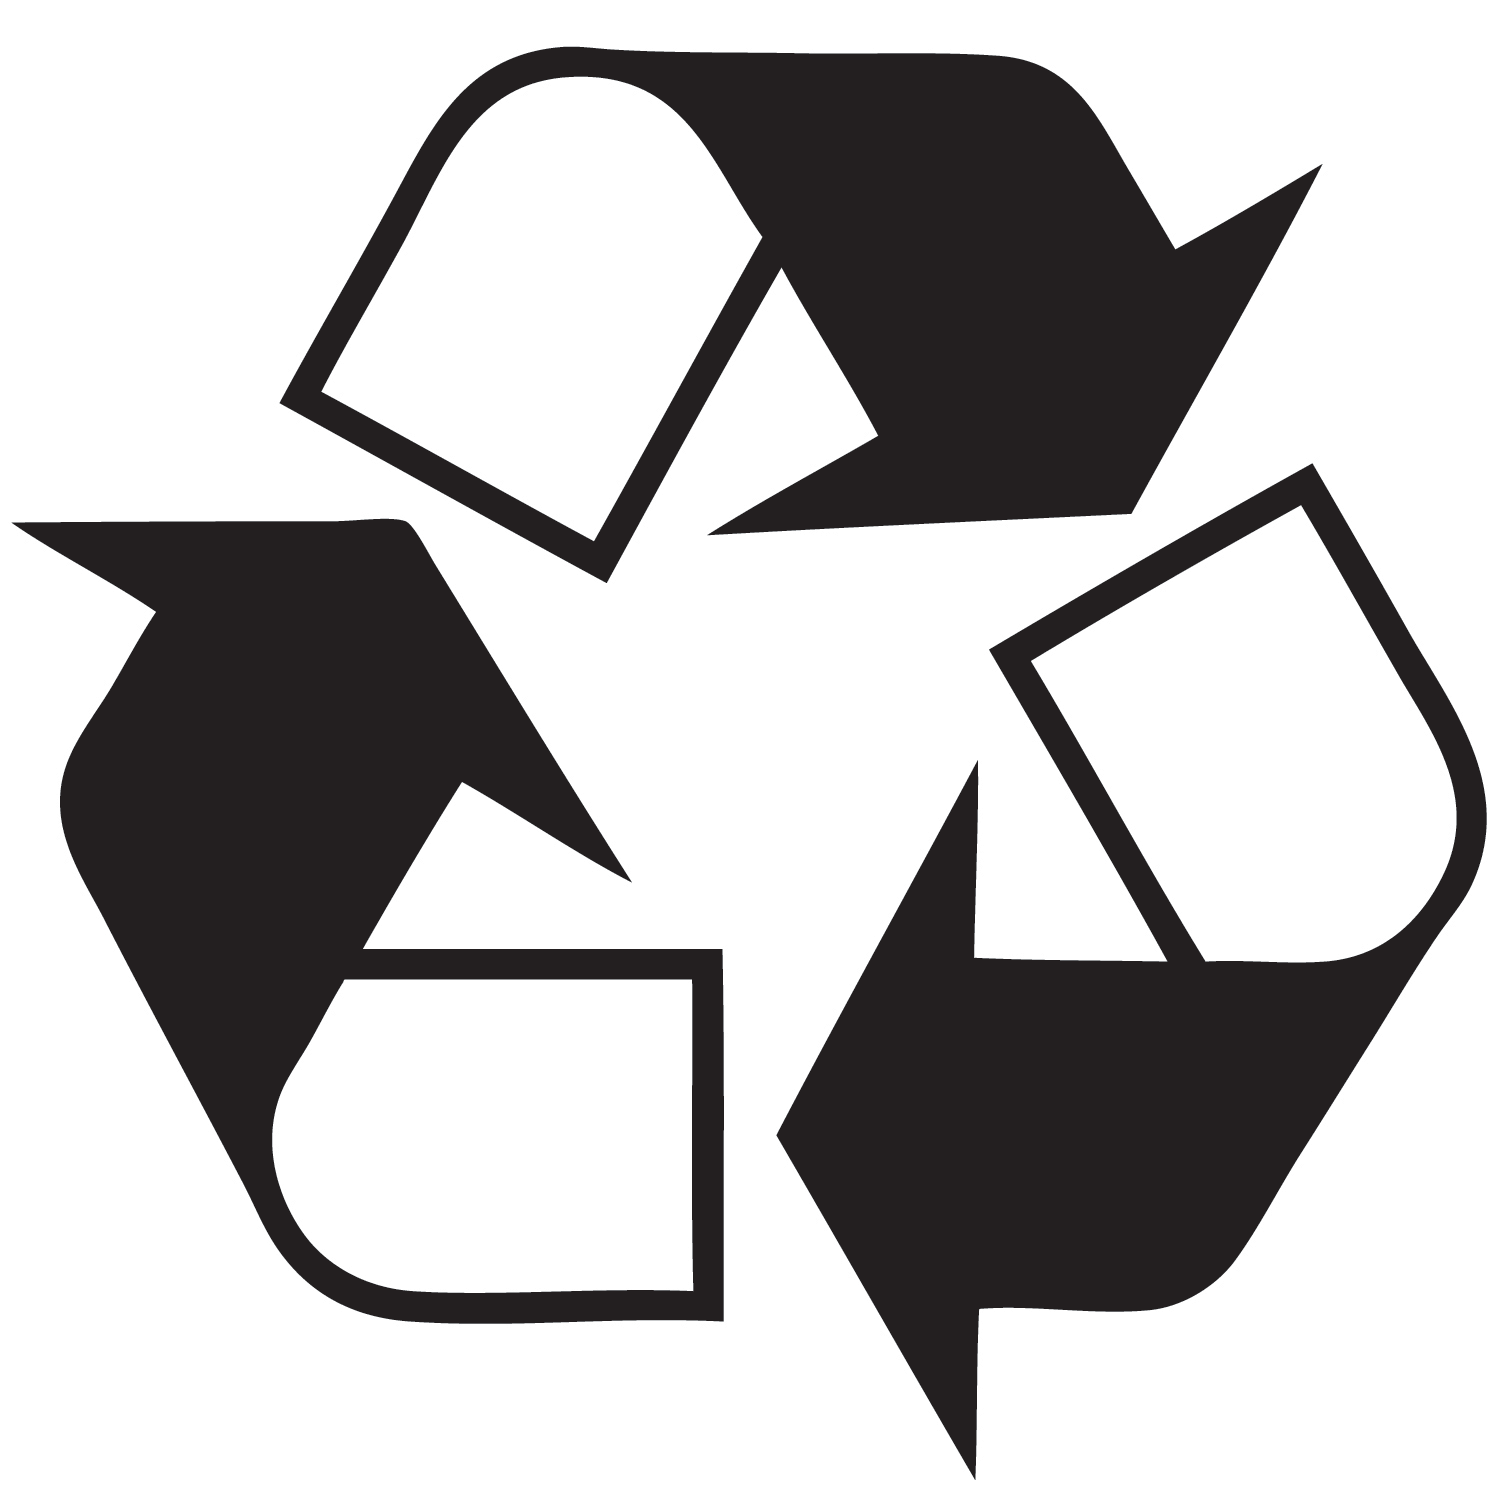 Recycle Signs Clip Art - Cliparts.co